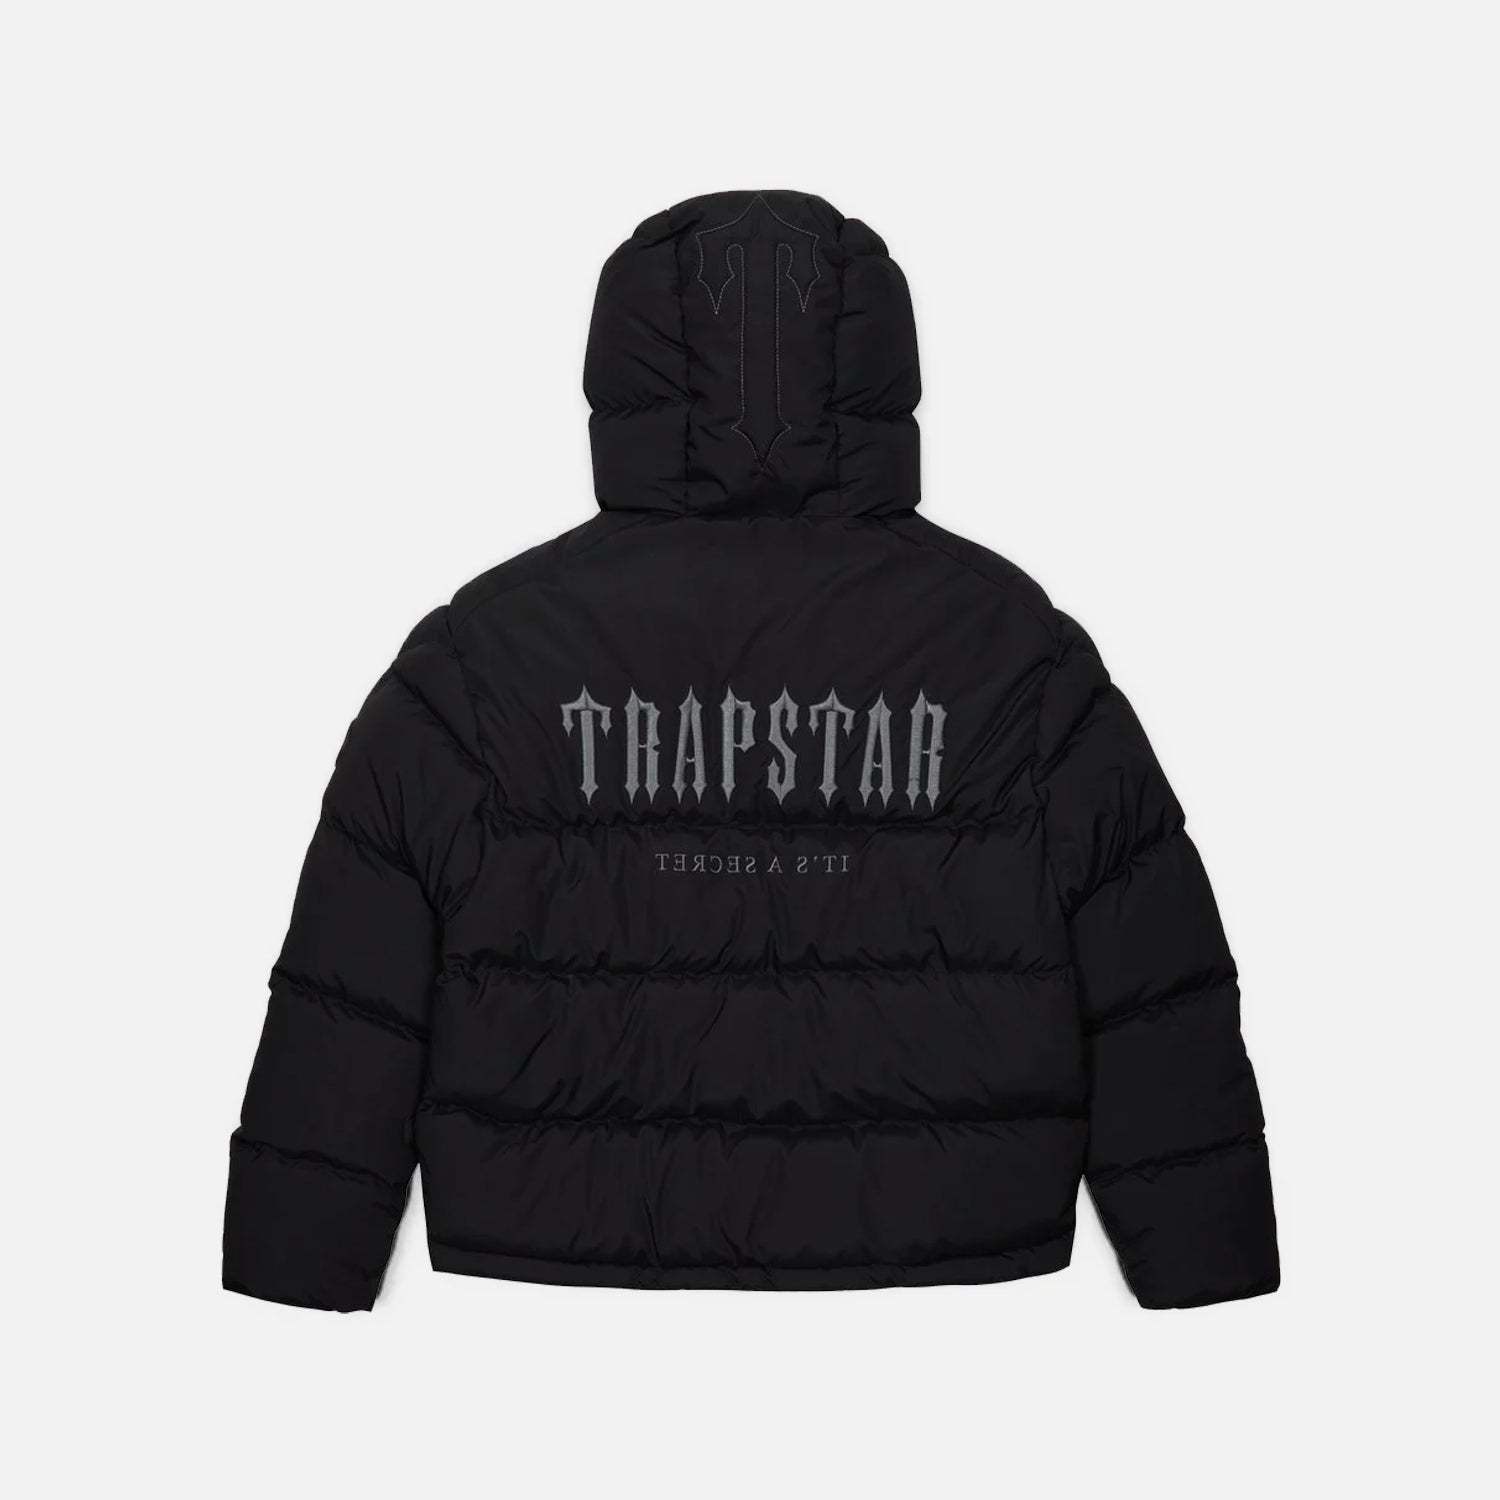 Trapstar Decoded Hooded Puffer 2.0 Jacket - Black